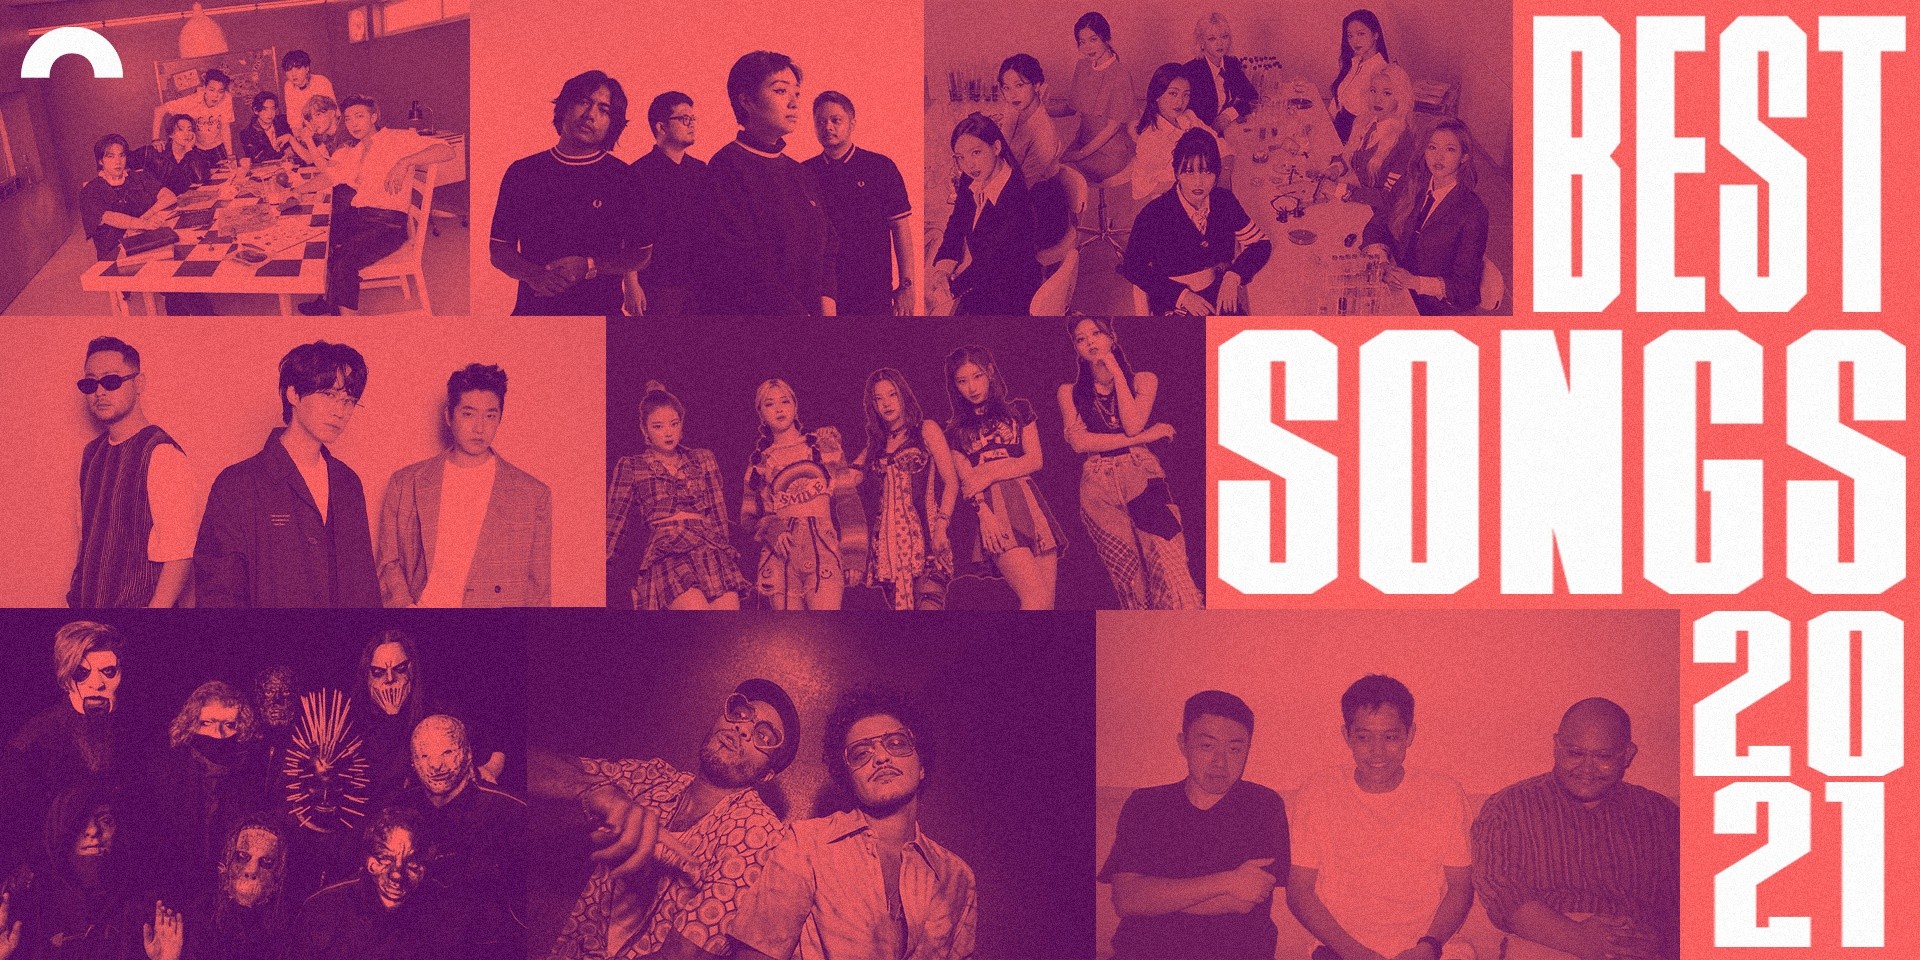 Best of 2021: Songs of the Year – BTS, Epik High, Terrible People, UDD, Slipknot, ITZY, Silk Sonic, TWICE, and more